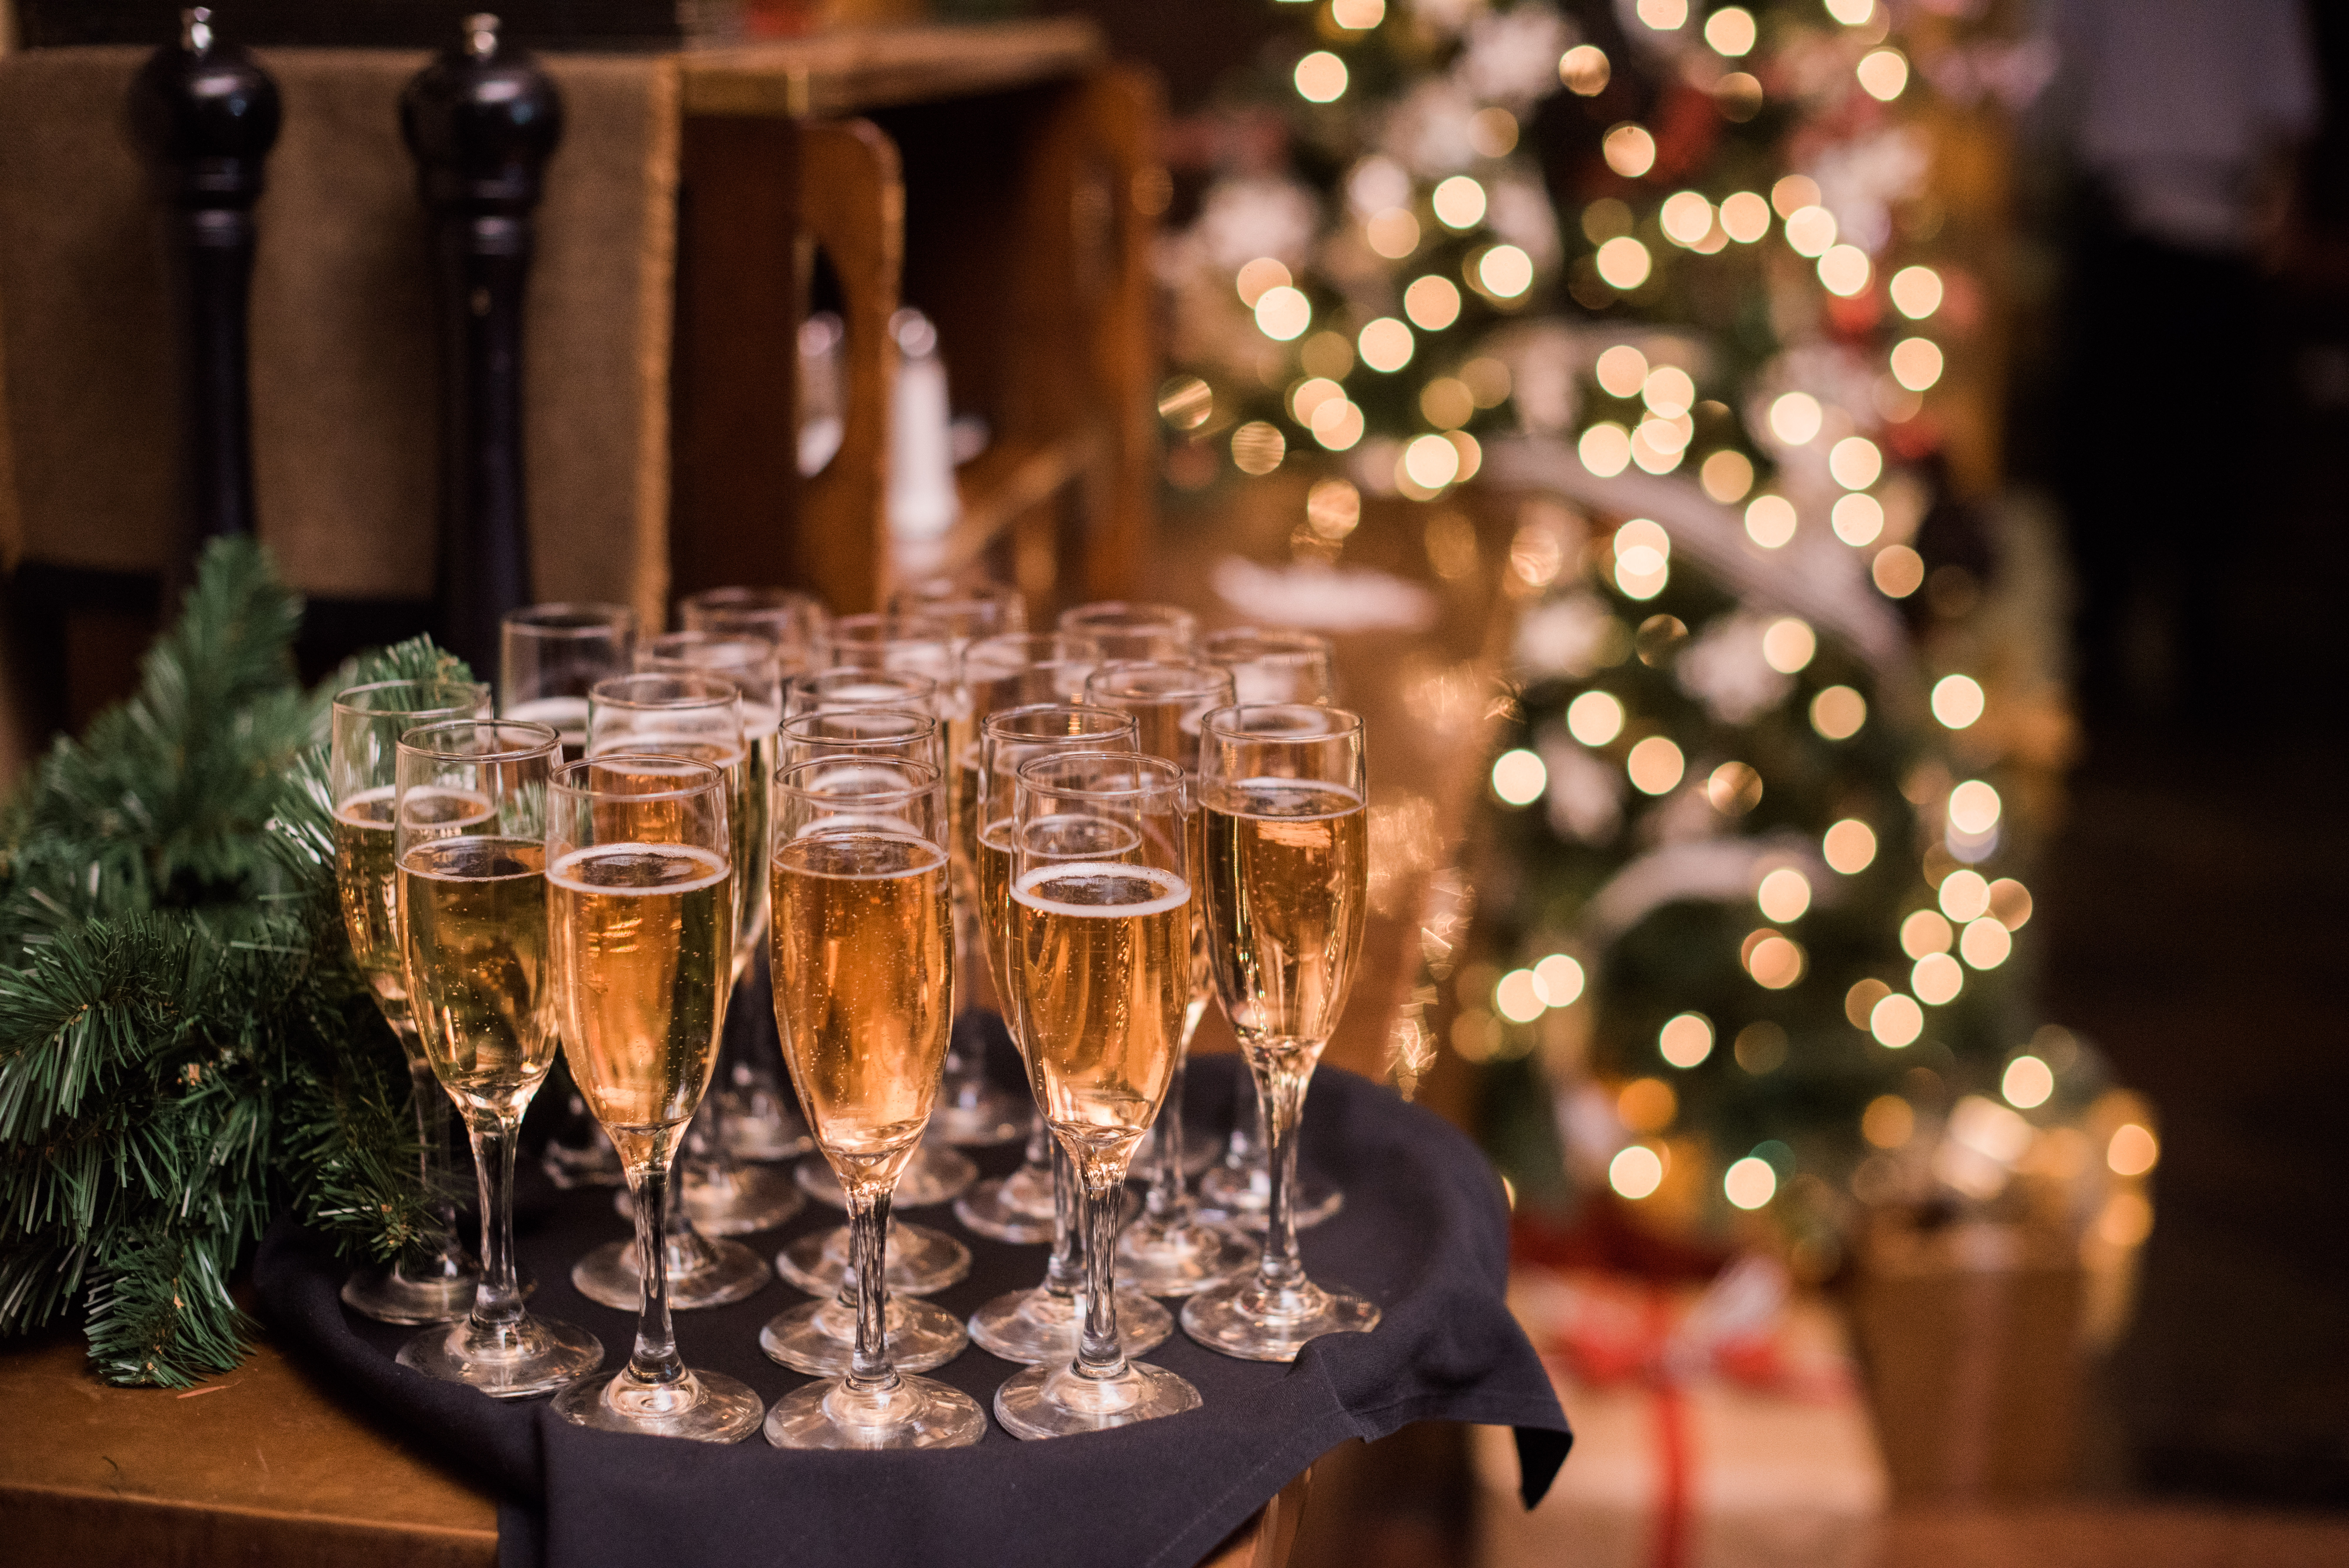 Holidays and champagne go hand in hand!